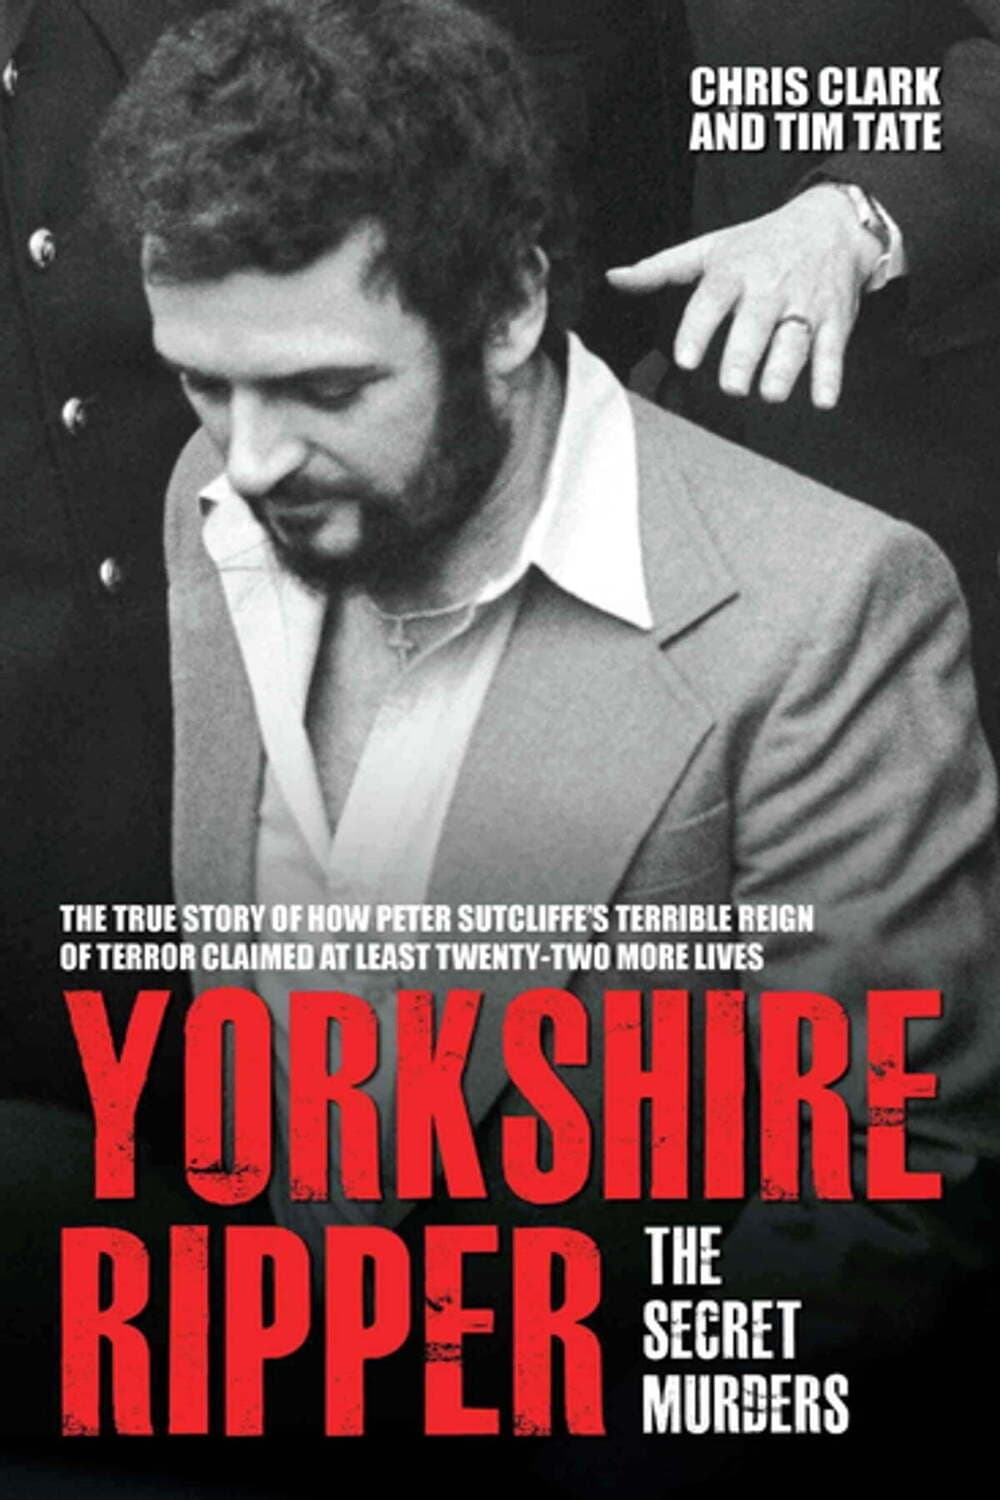 Yorkshire Ripper: The Secret Murders TV Shows About True Crime